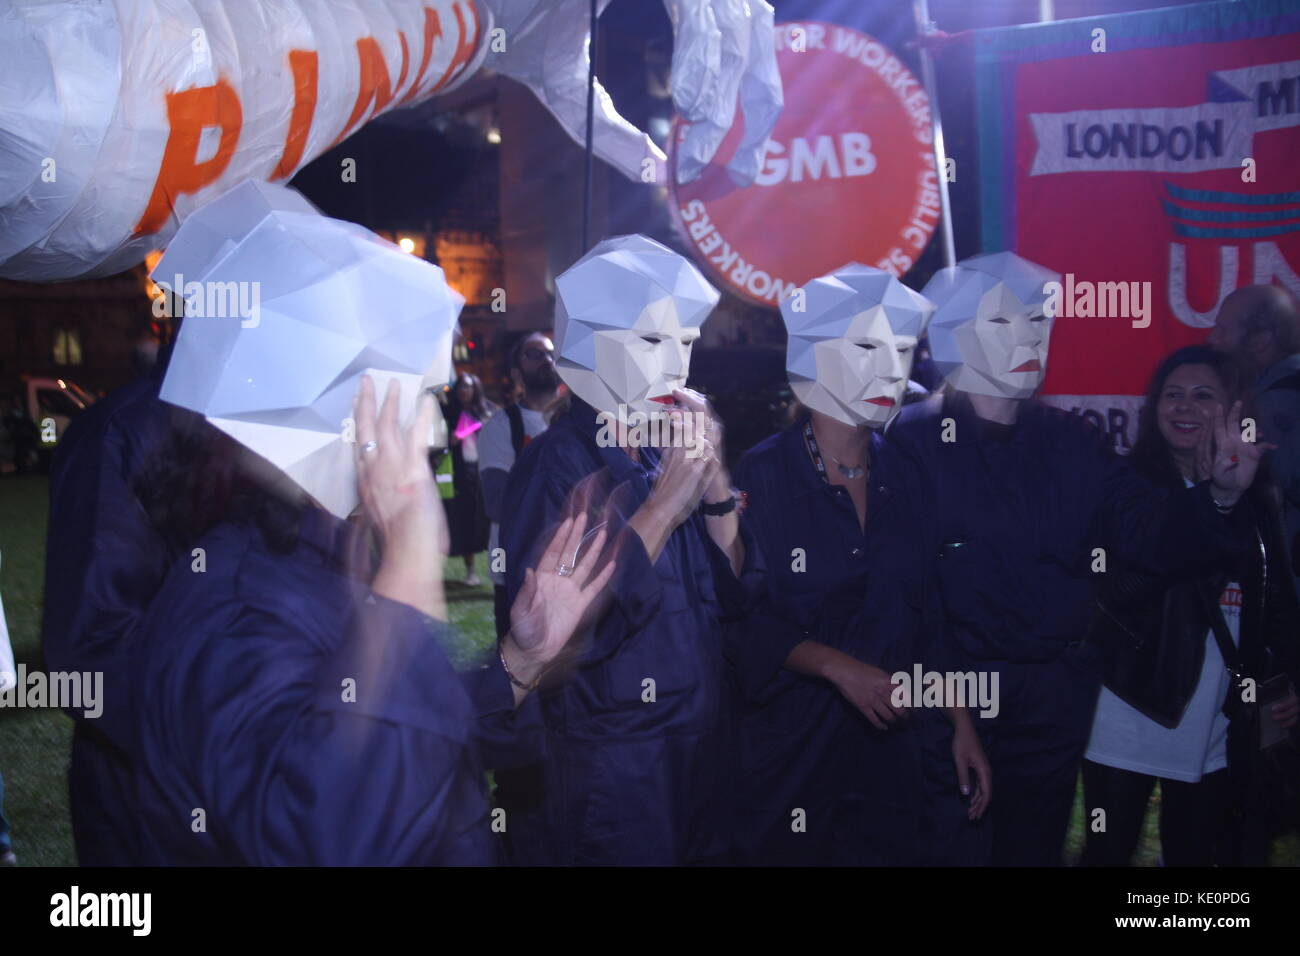 London, UK. 17th October 2017. 'Maybots' at the TUC rally in Westminster to protest the 1% cap on payrises to government employees. Roland Ravenhill/Alamy Live News Stock Photo